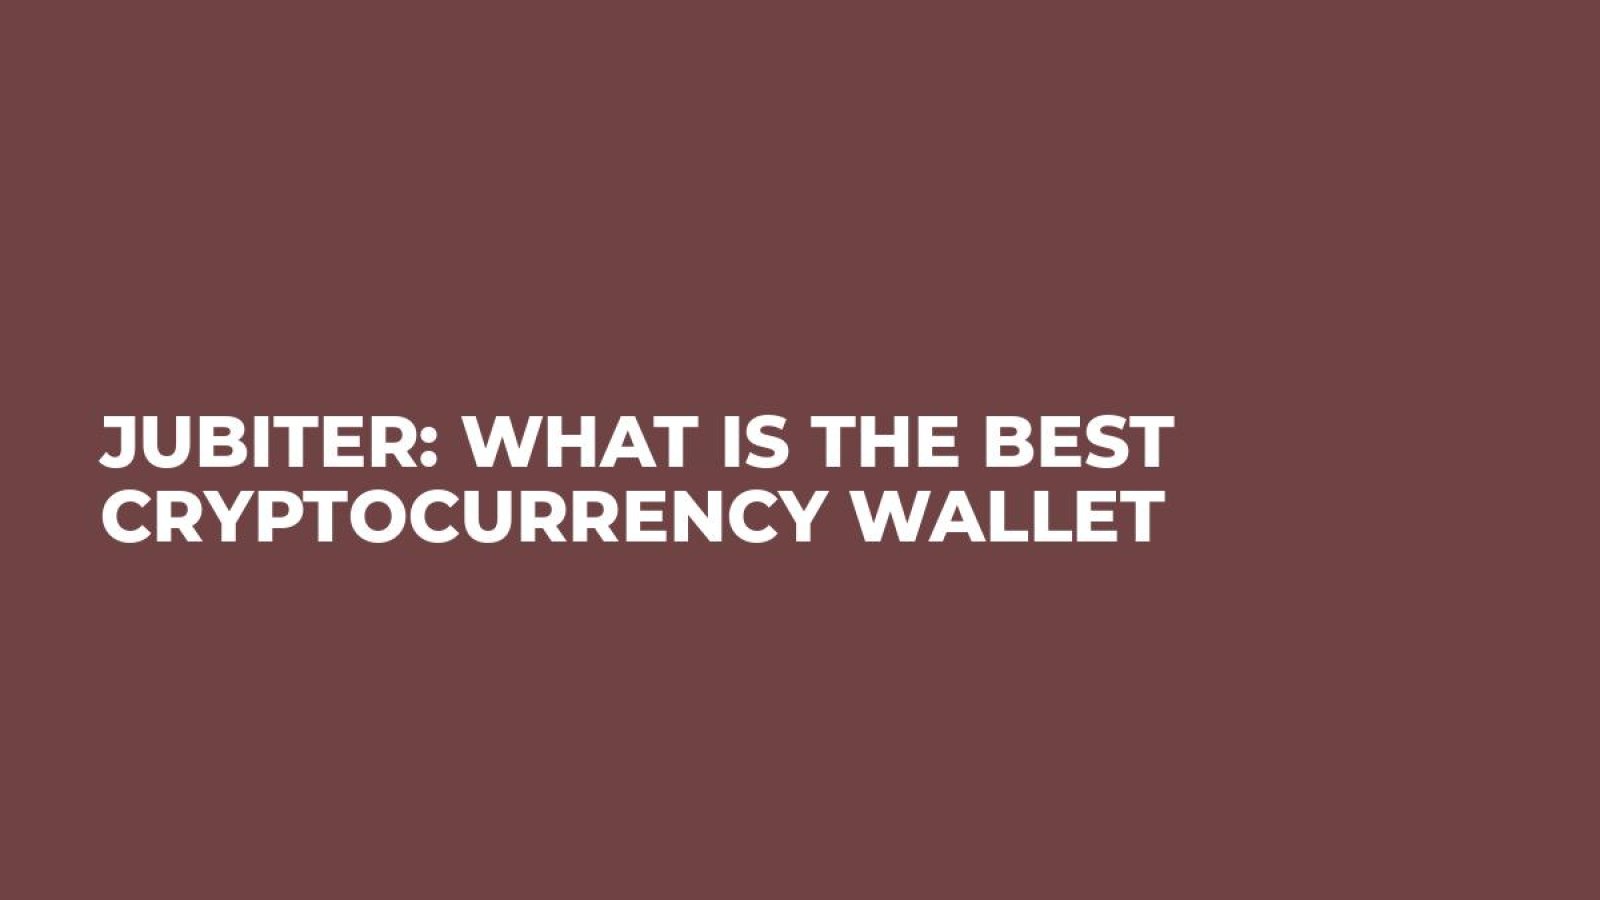 Jubiter: What is the best cryptocurrency wallet